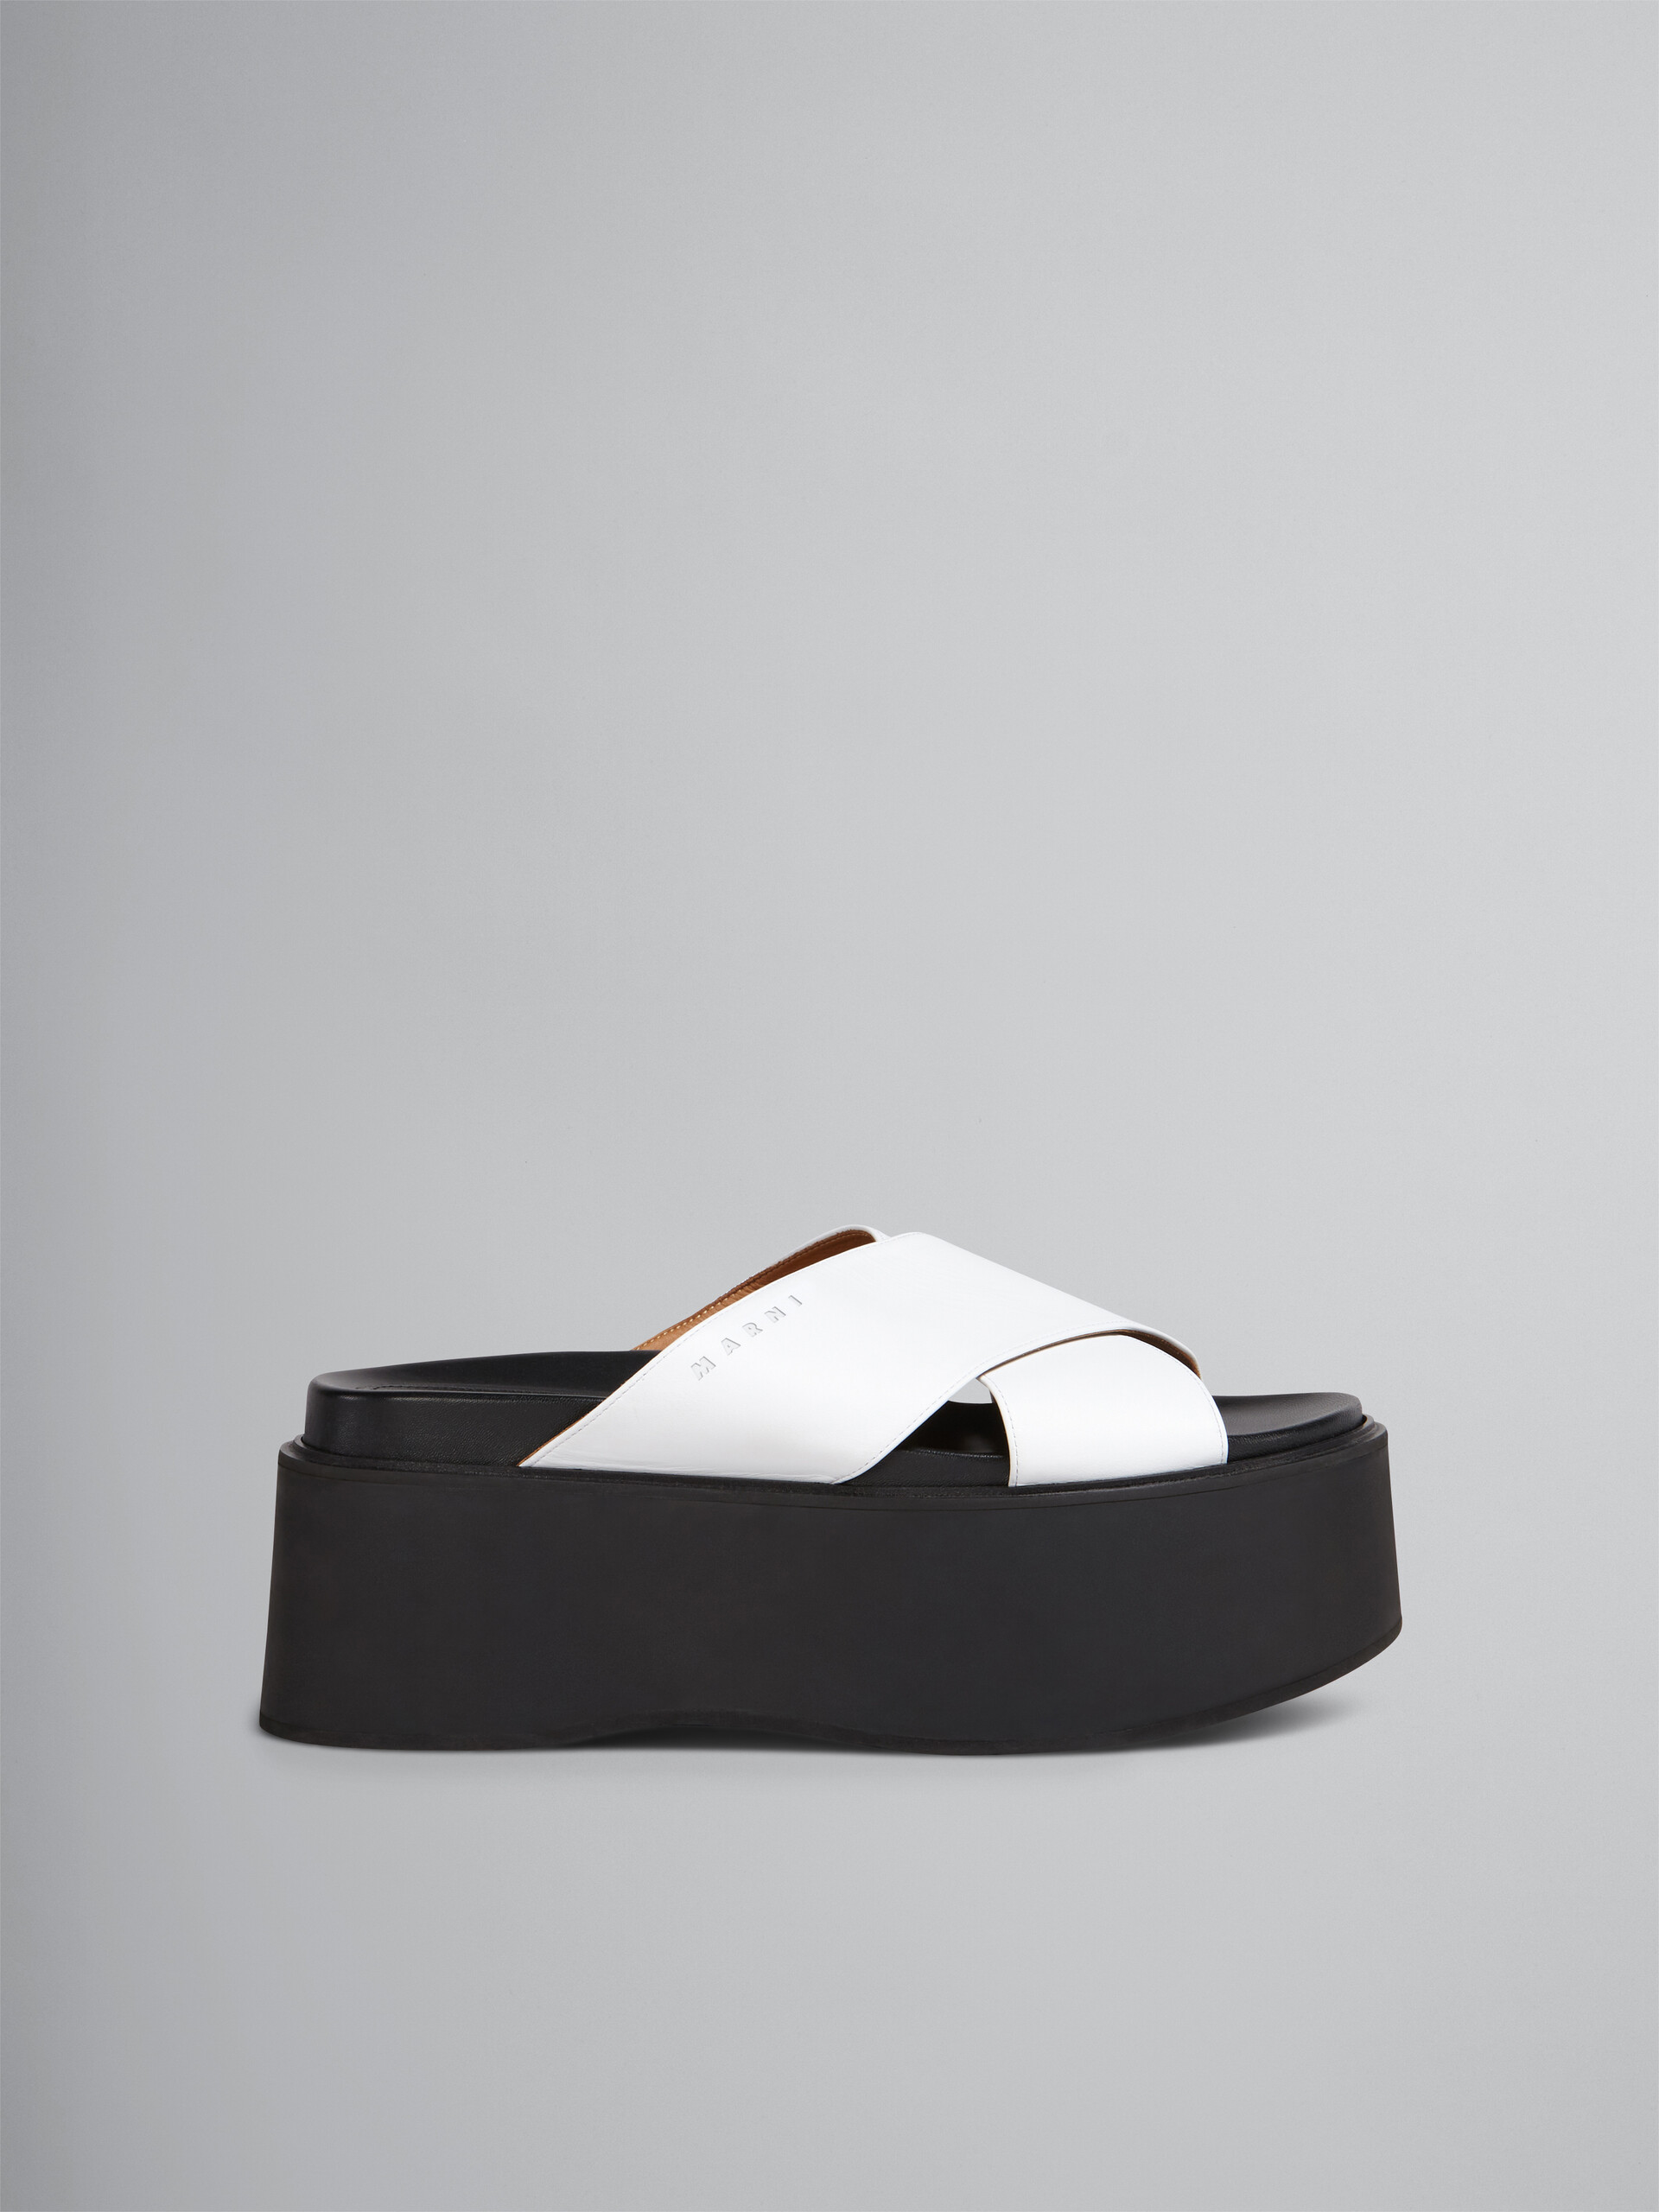 Criss-cross wedge in white calf leather - Sandals - Image 1